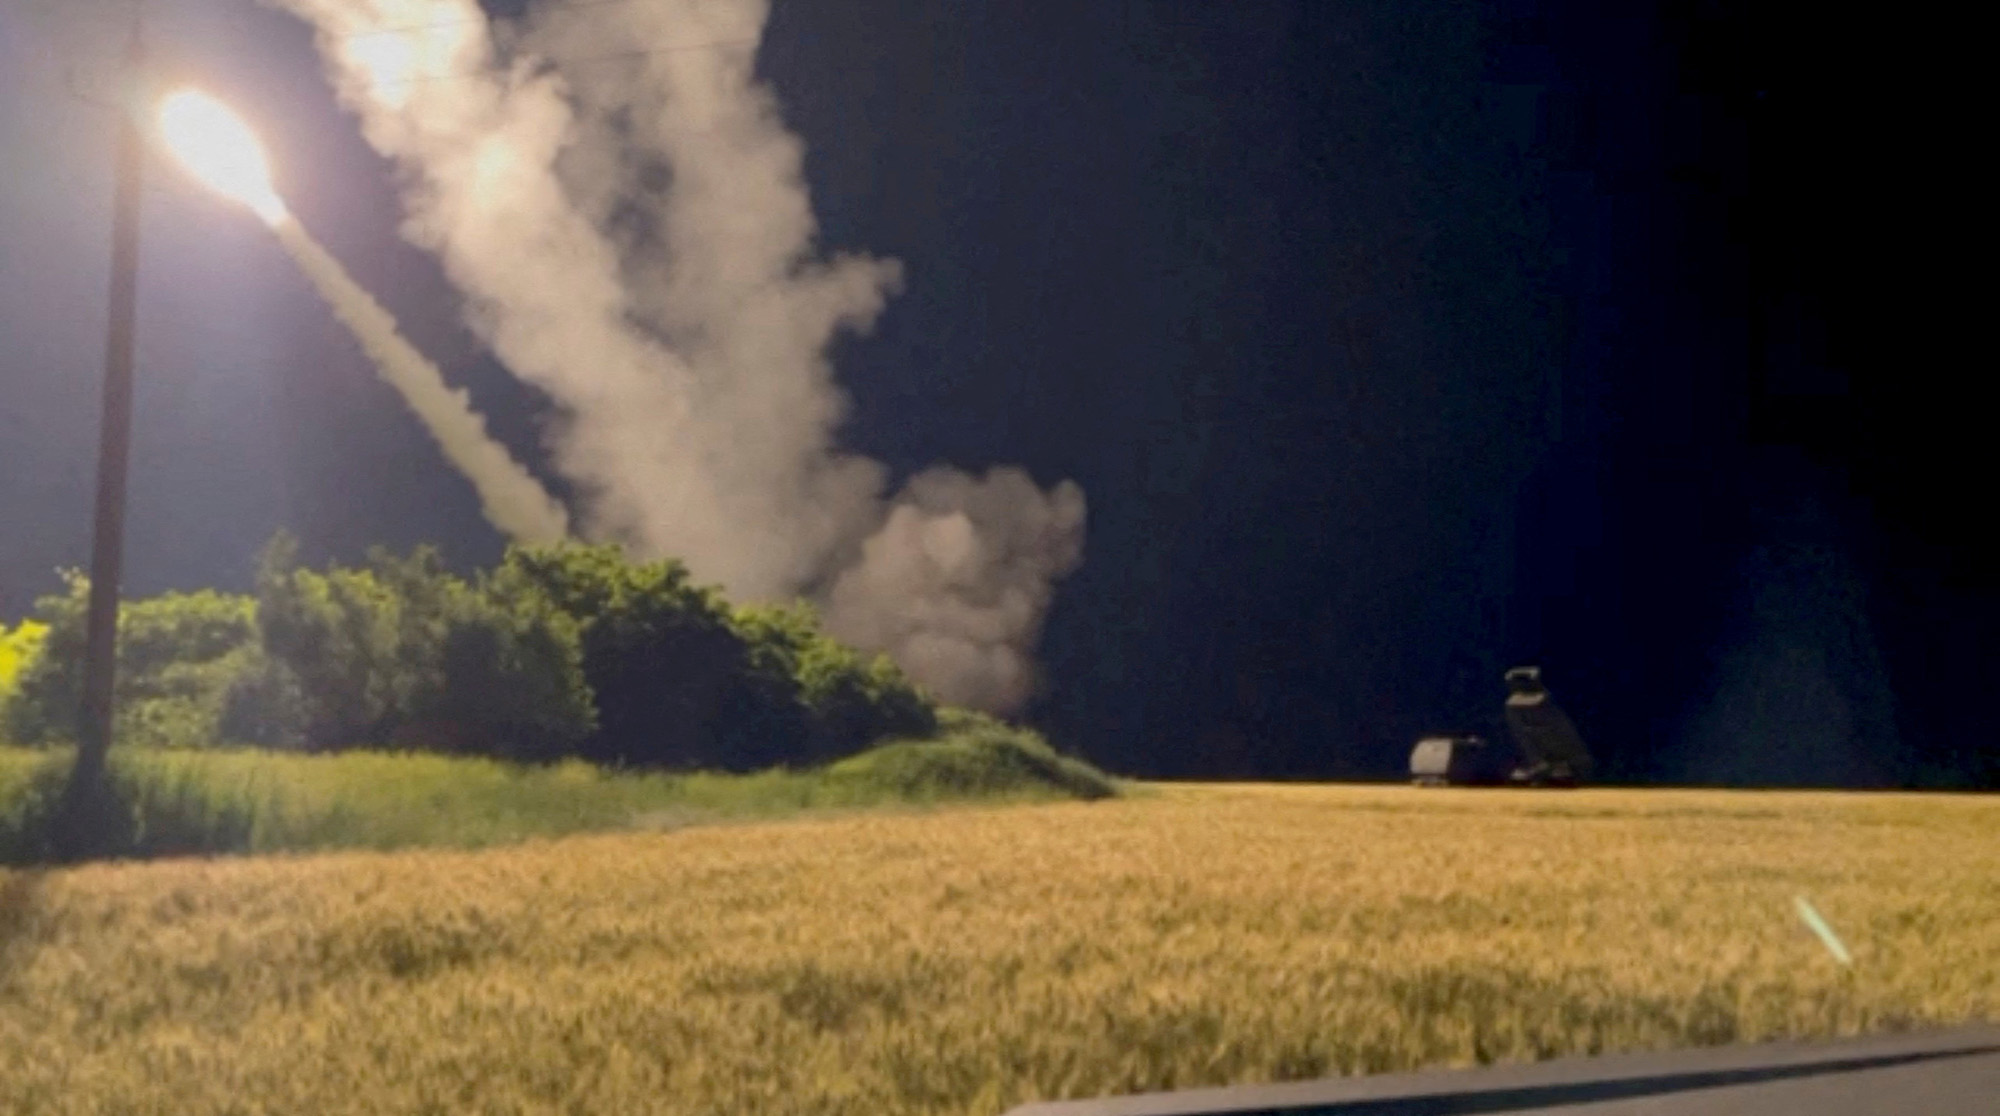 A High Mobility Artillery Rocket System (HIMARS) is fired in an undisclosed location in Ukraine in this still image from June 24.